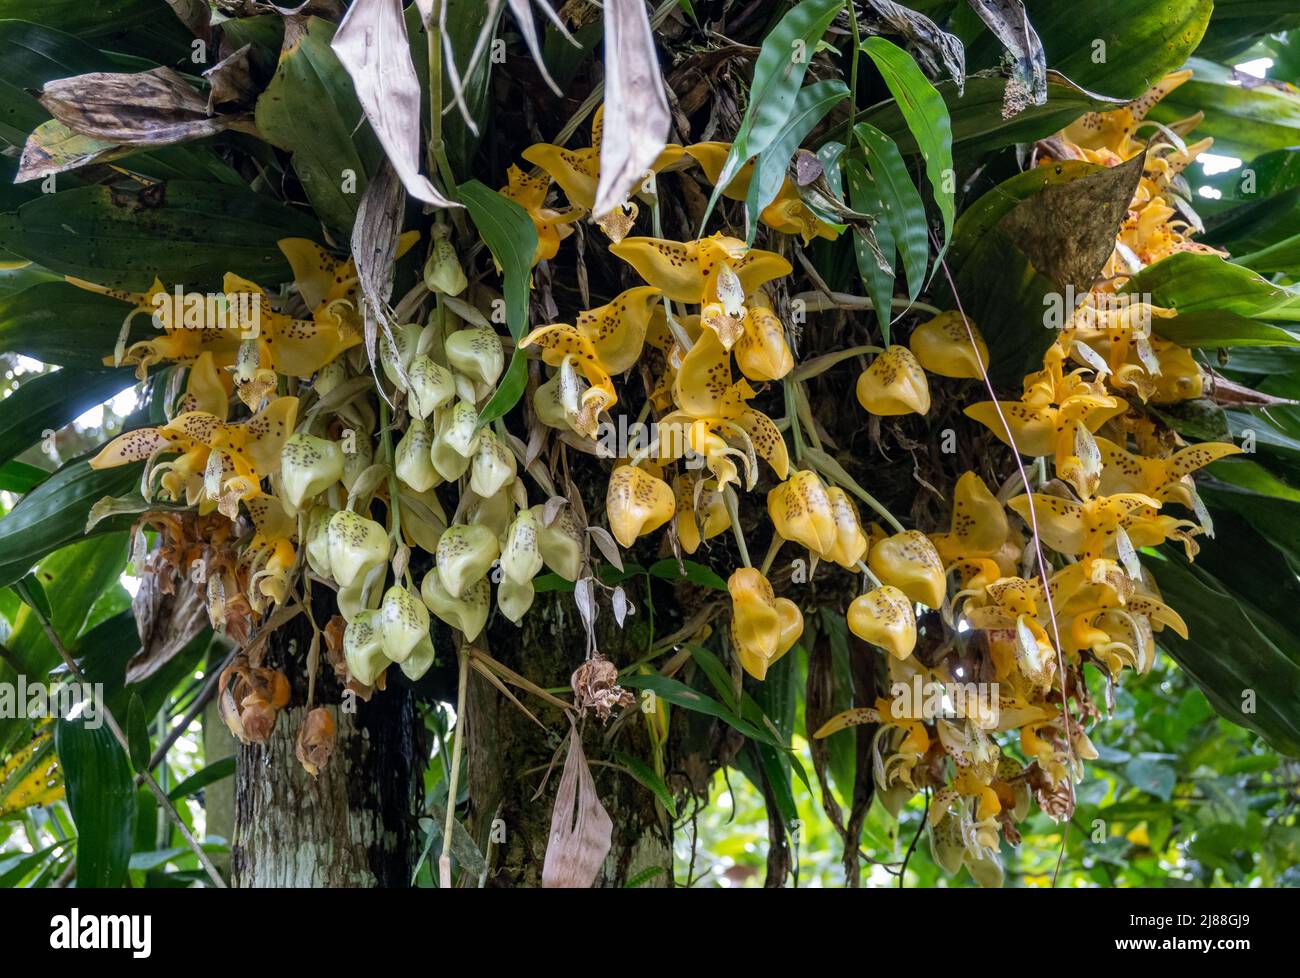 Stanhopea orchid flowers in full bloom. Colombia, South America. Stock Photo